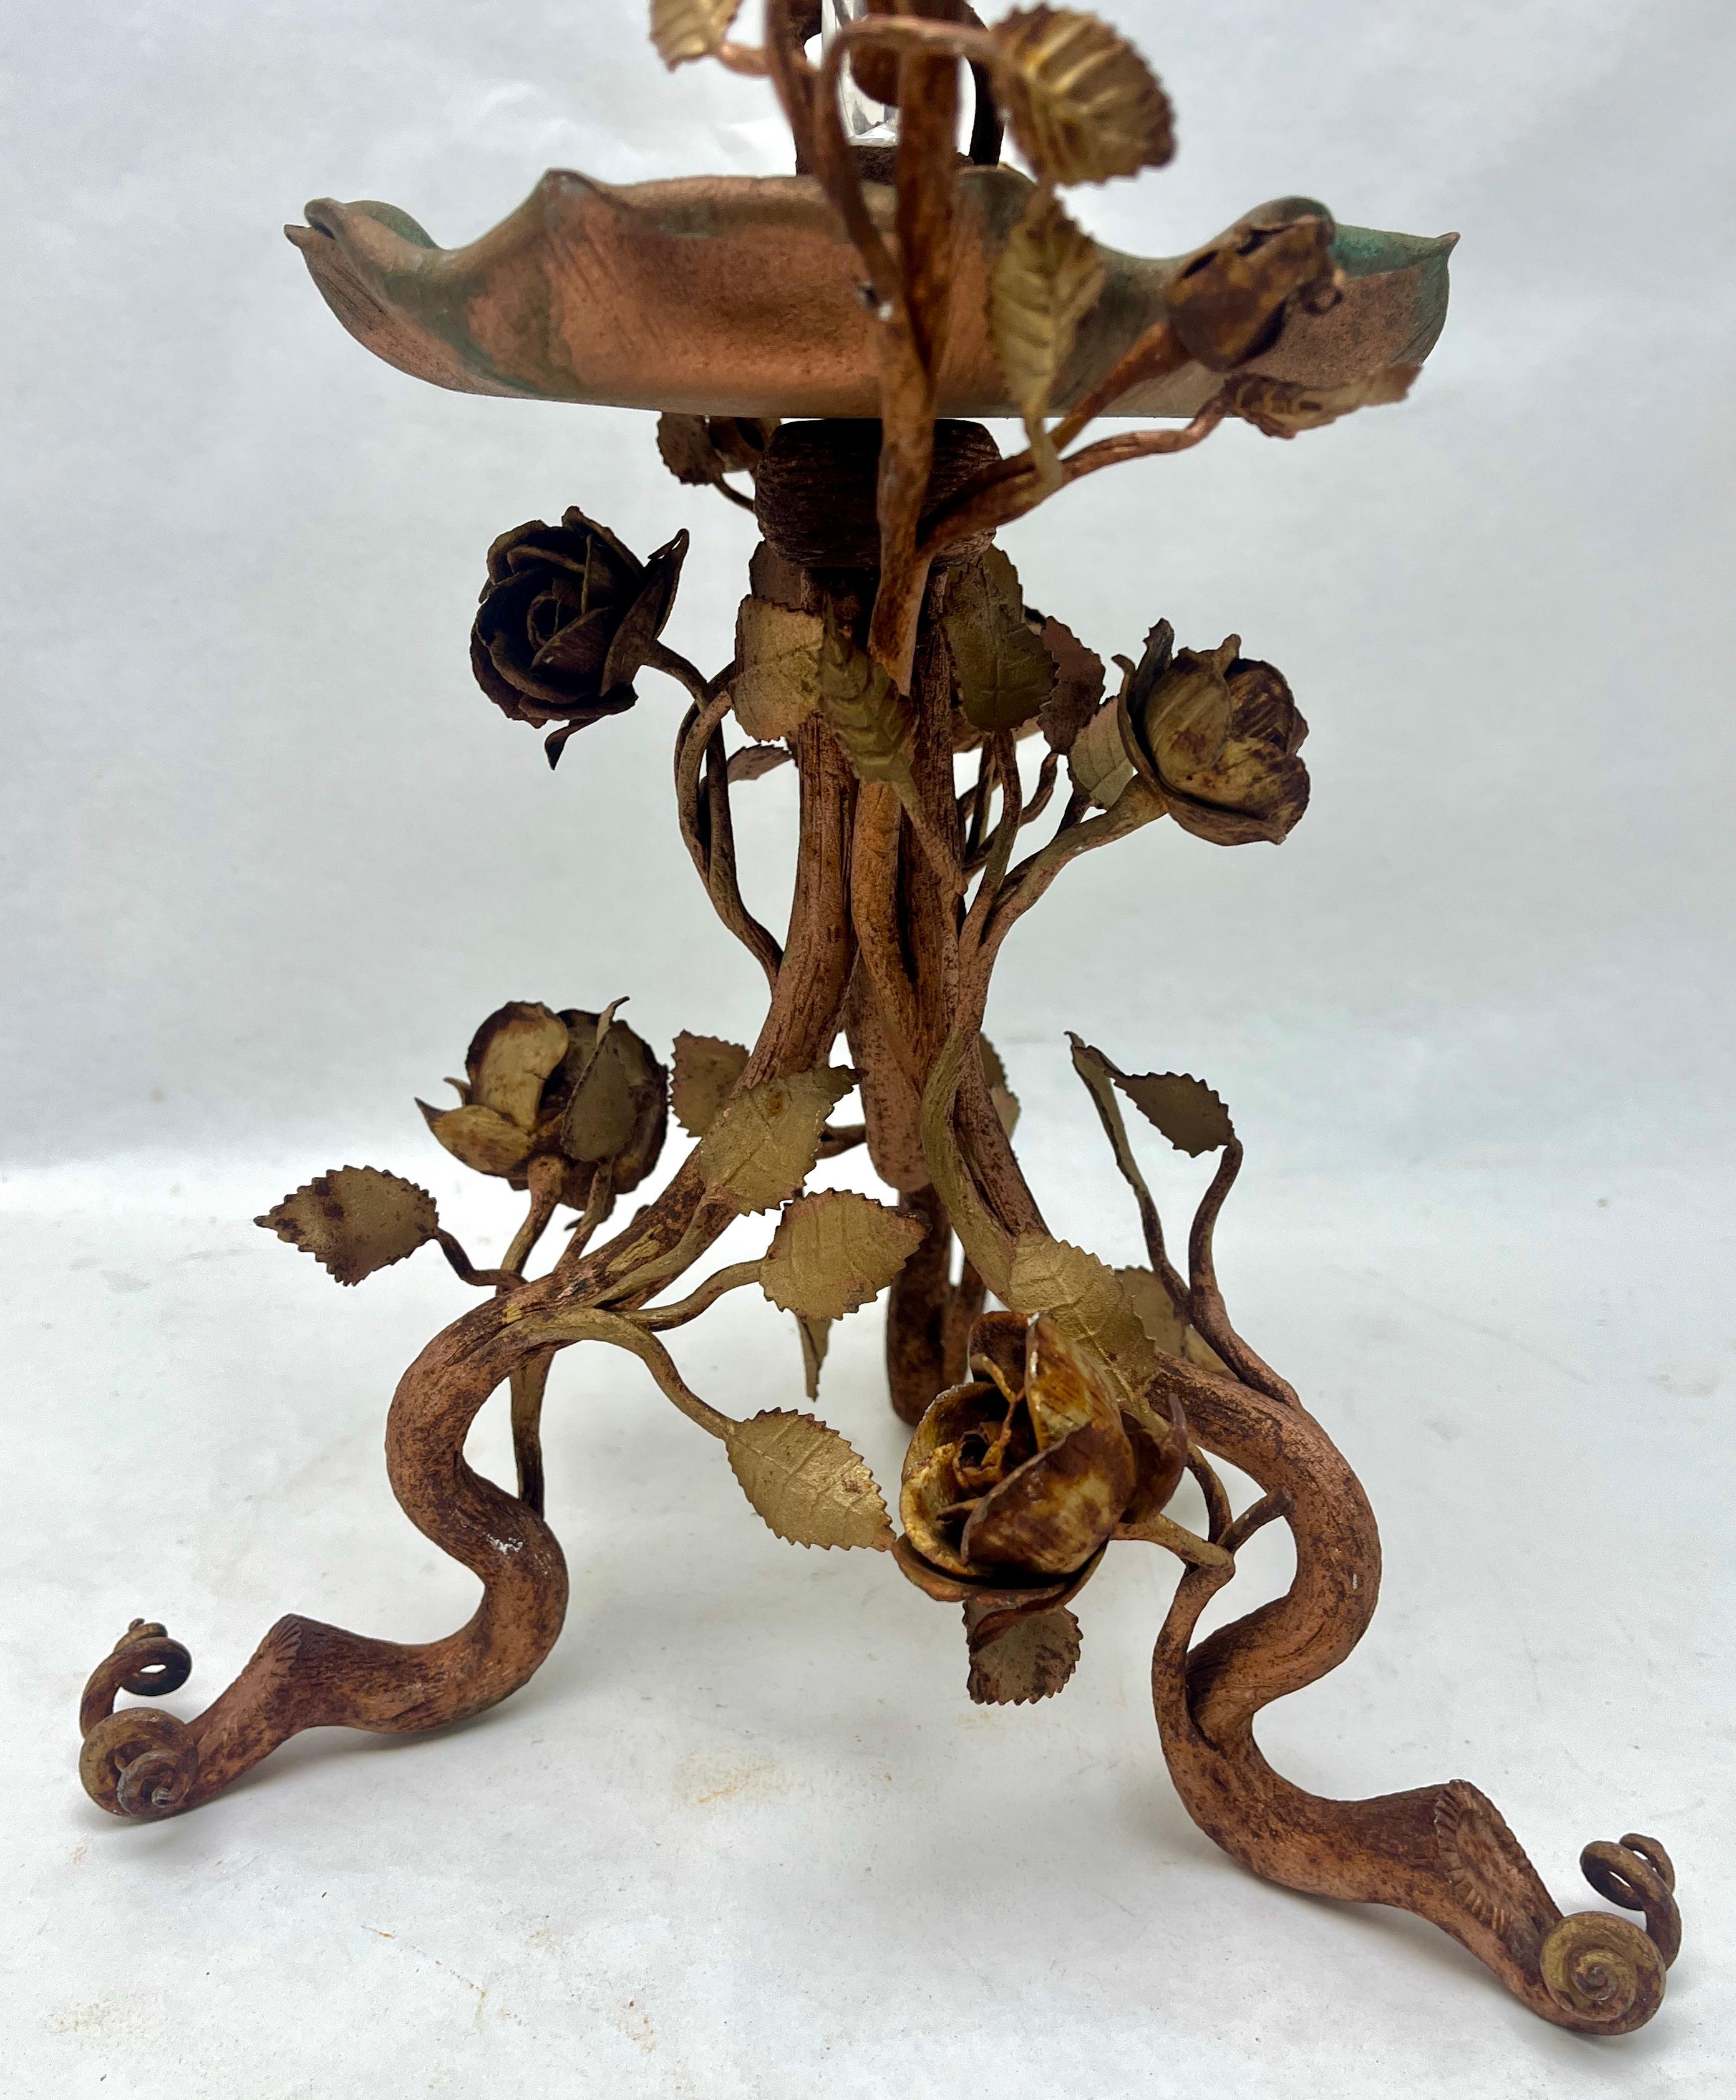 Table centrepiece made of hand-worked iron in art nouveau style presenting a crystal trumpet stem vase / epergne engraved with floral motif

The piece is in Good condition and a real beauty!
With original patina on all parts
Small chip on top of